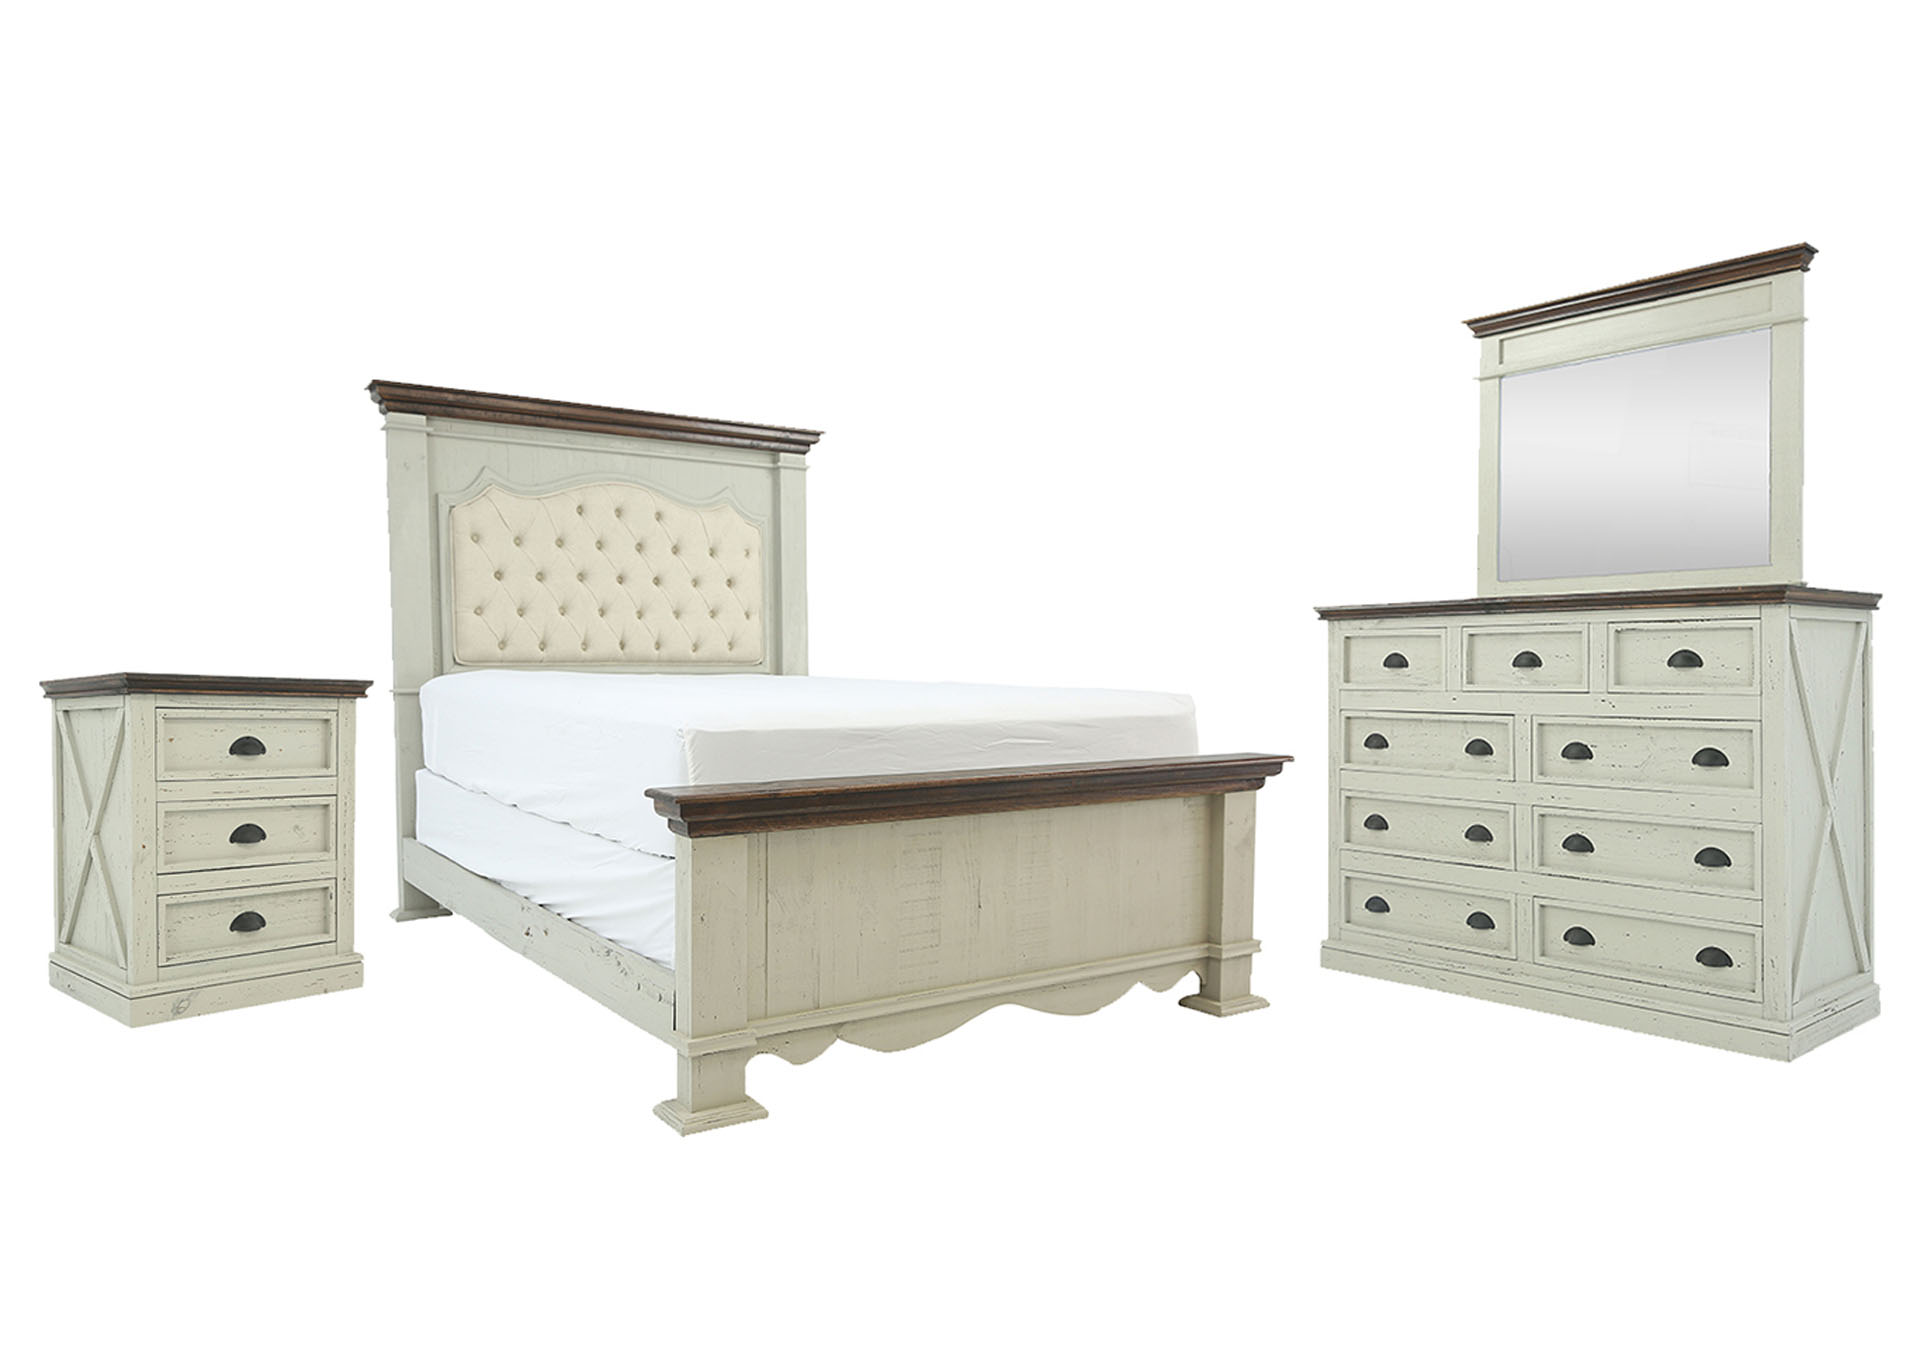 FIFTH AVENUE TWO TONE KING BEDROOM SET,ARDENT HOME